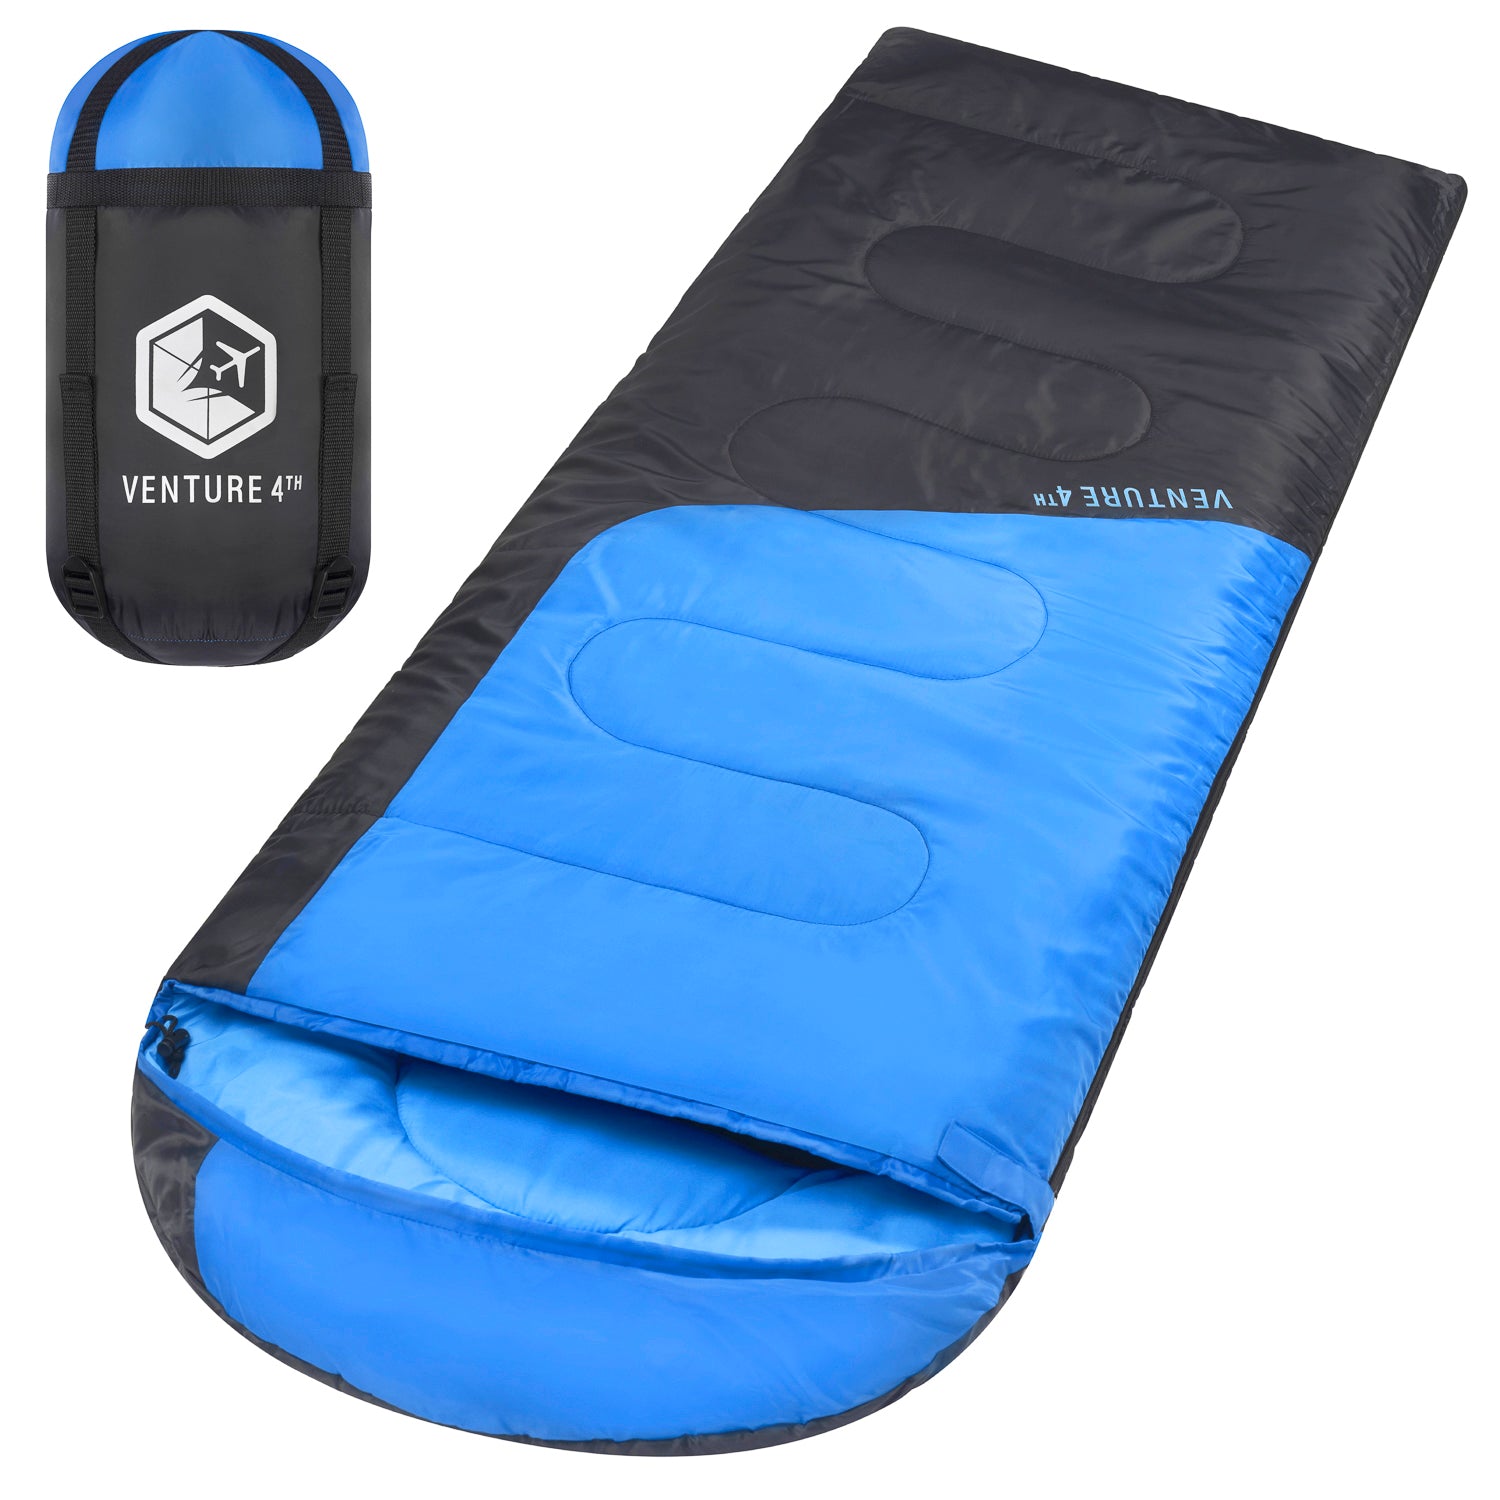 VENTURE 4TH Ultralight Inflatable Sleeping Pad for Camping Hiking & Backpacking 